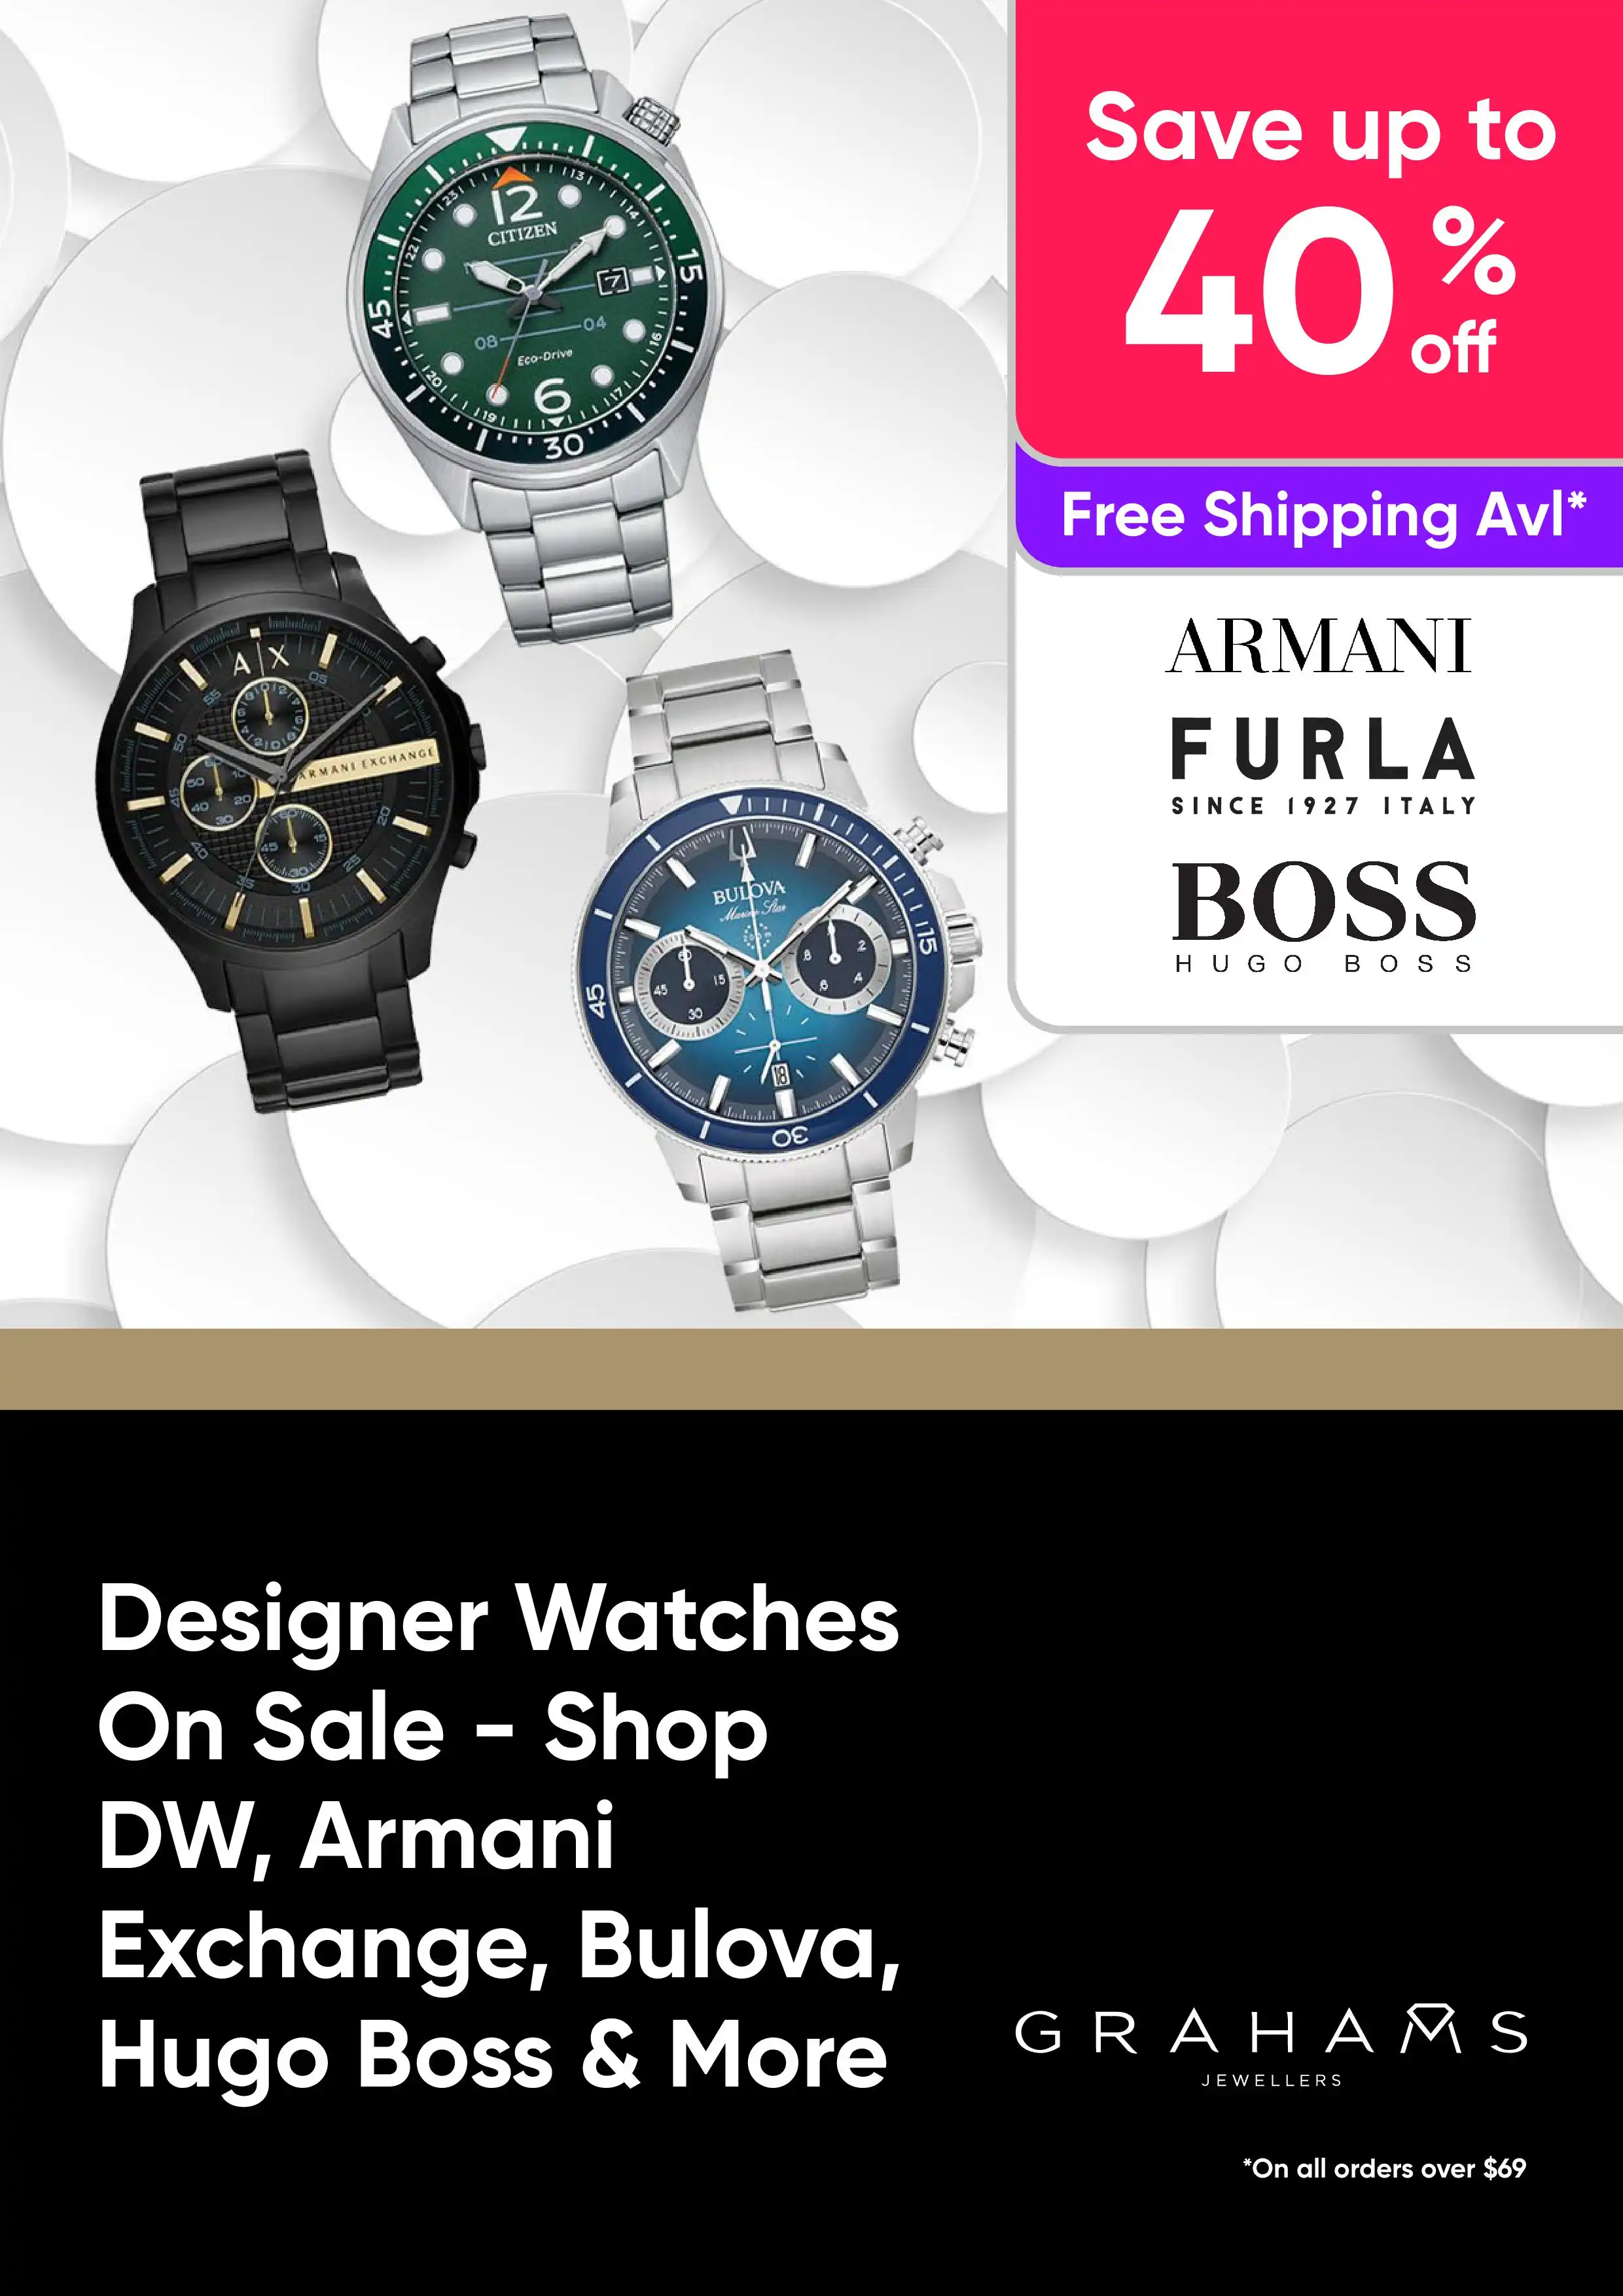 Designer Watches On Sale - Shop DW, Armani Exchange, Bulova, Hugo Boss and More - Save Up to 40% Off